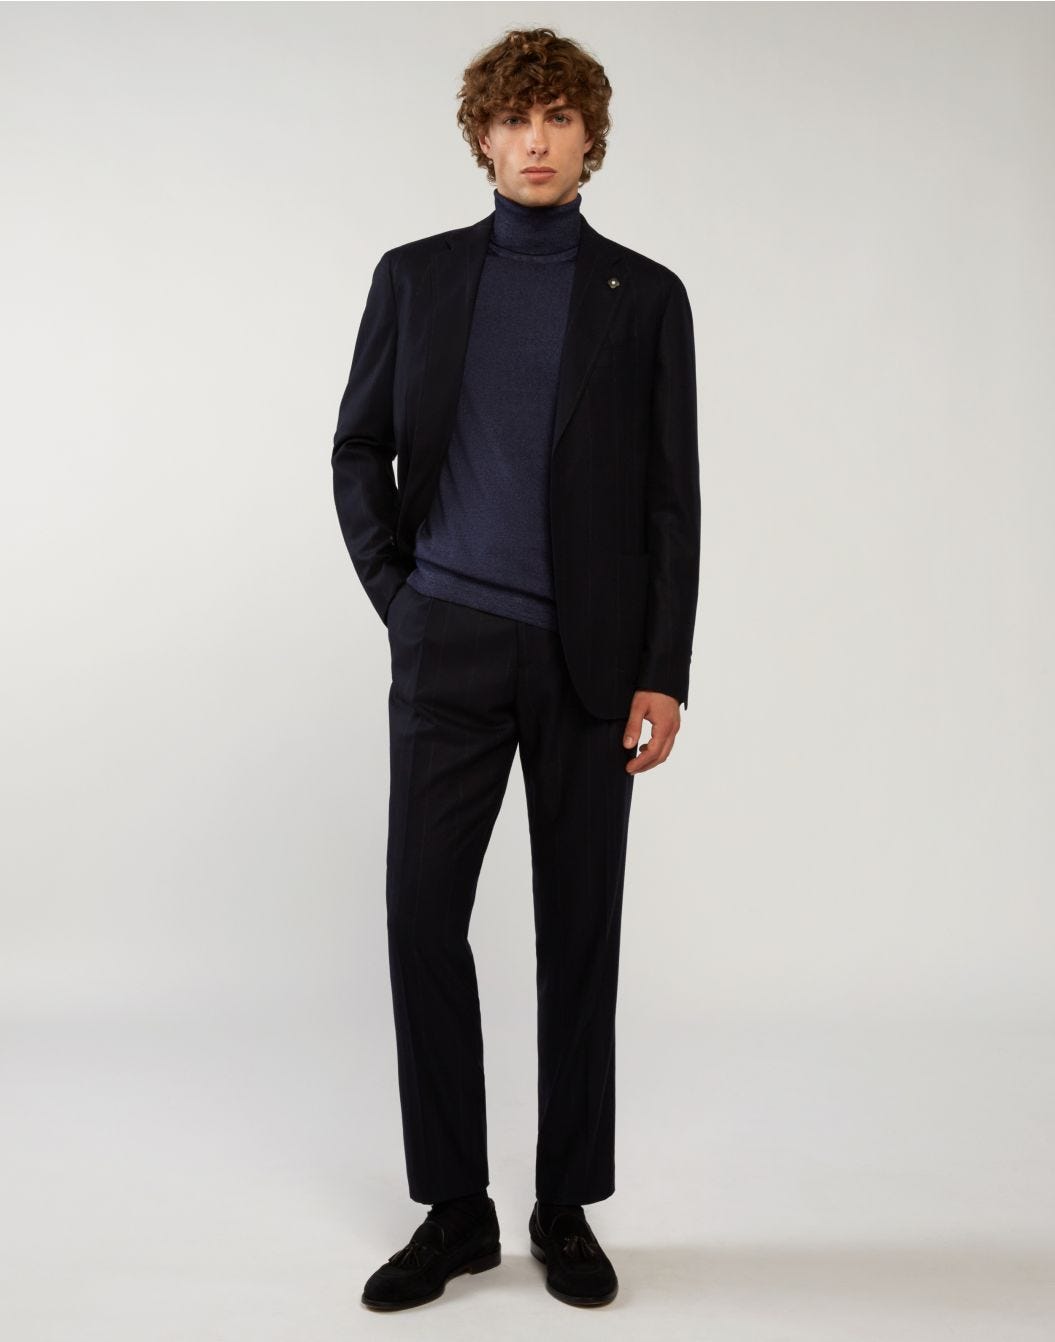 Turtleneck in blue worsted wool